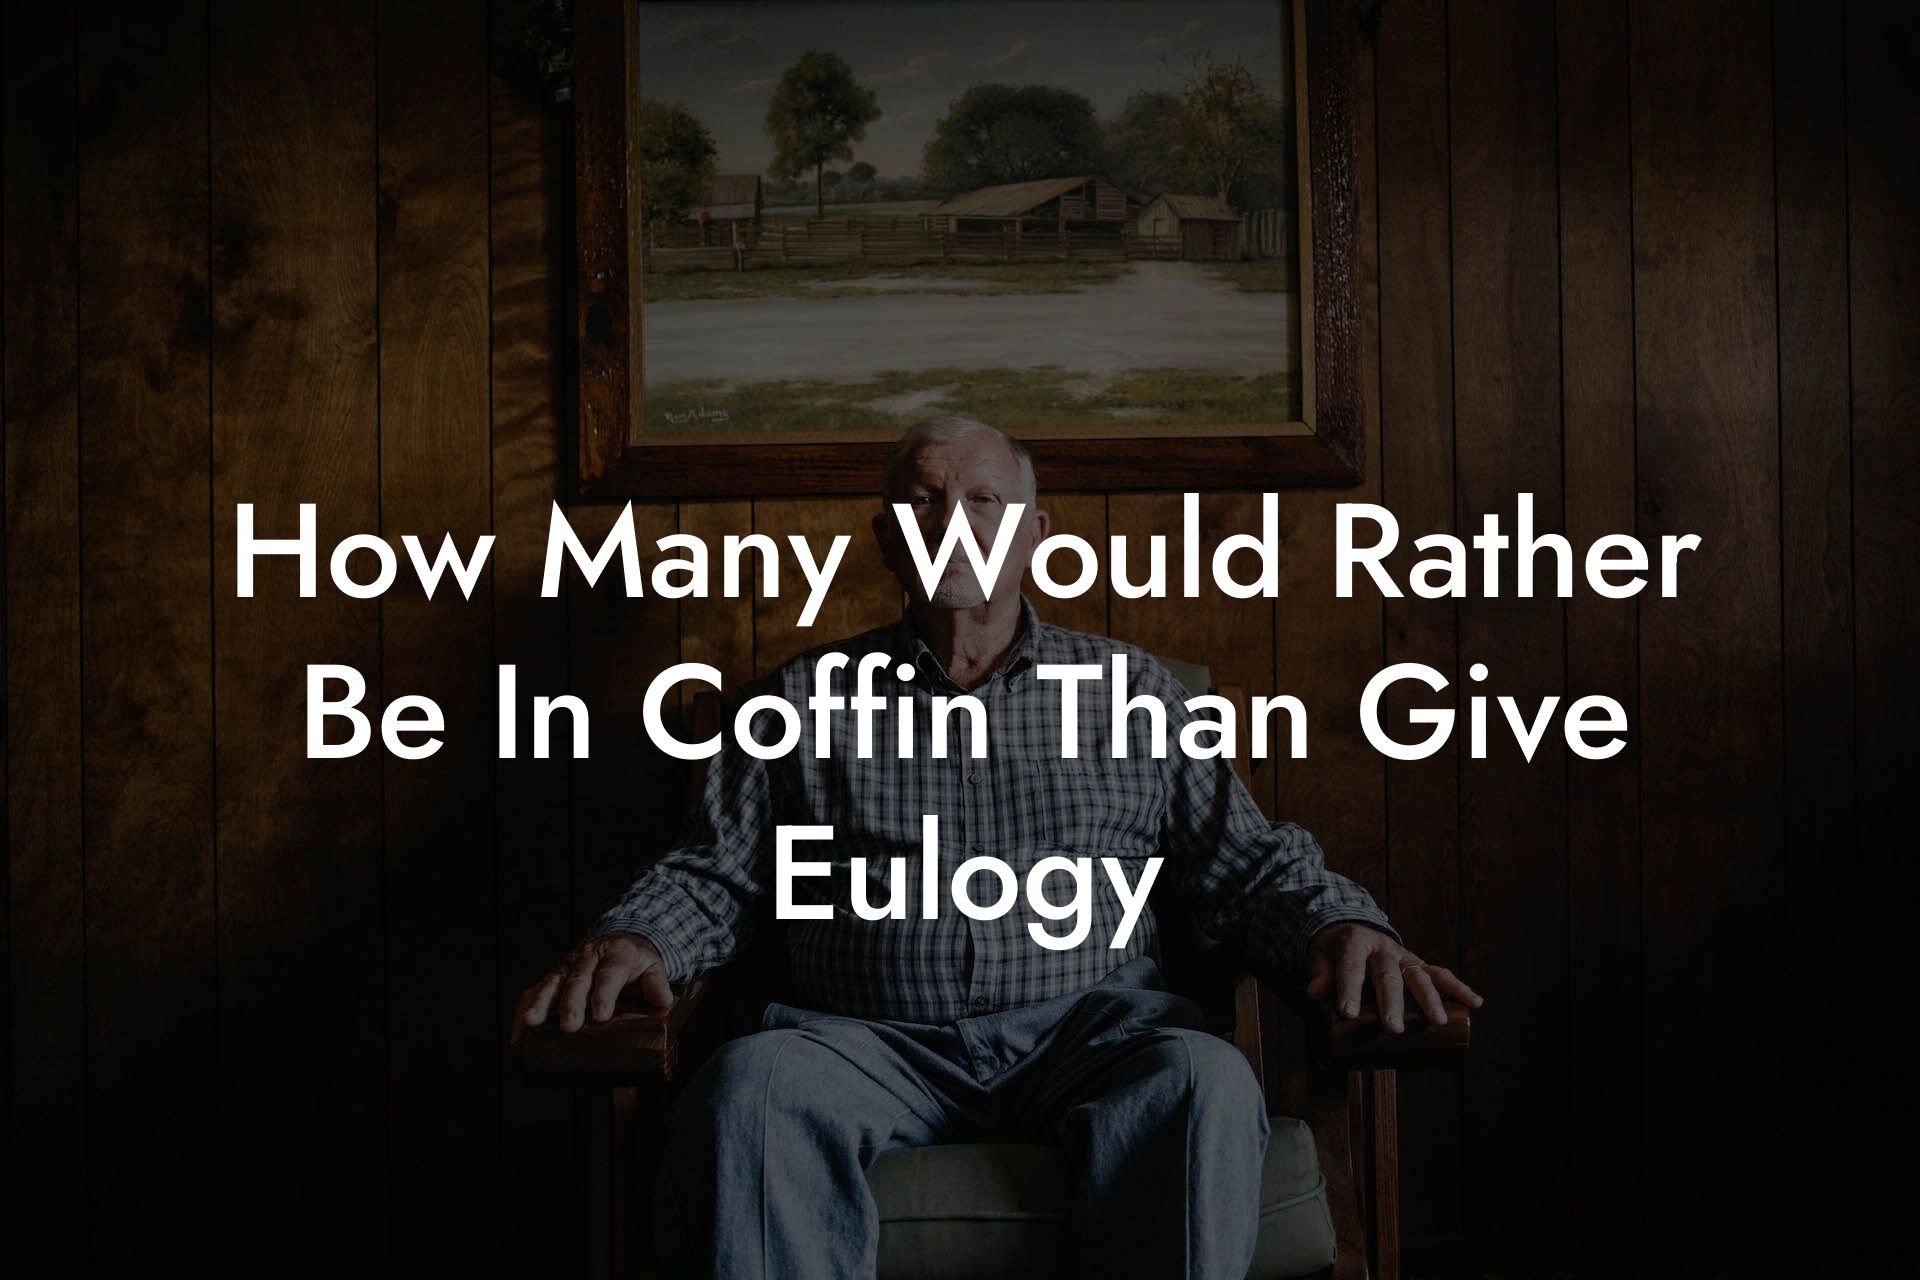 How Many Would Rather Be In Coffin Than Give Eulogy